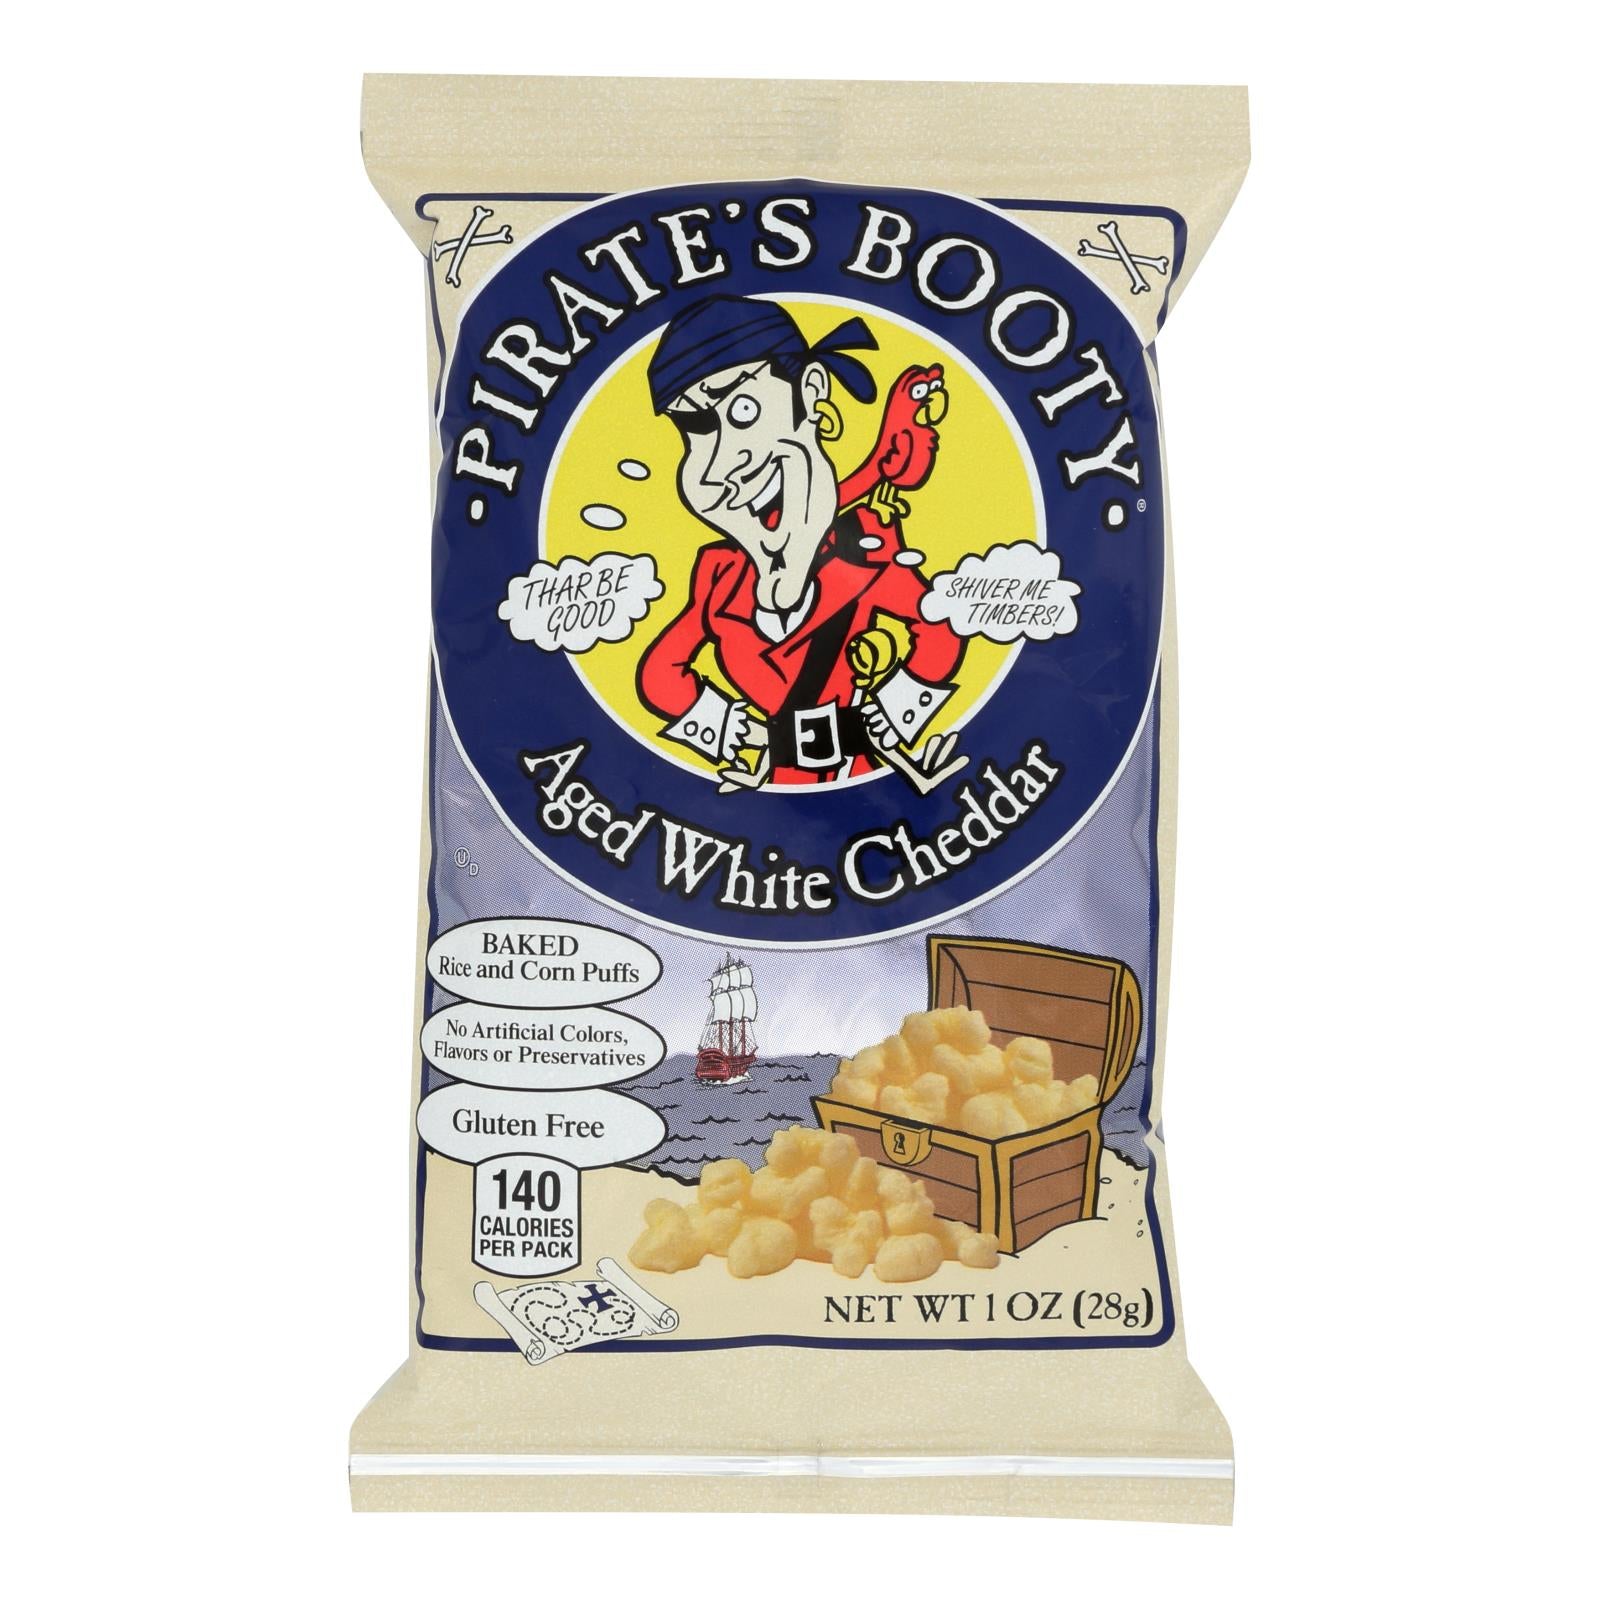 Pirate's Booty Aged White Cheddar Baked Rice And Corn Puffs  - Case Of 24 - 1 Oz